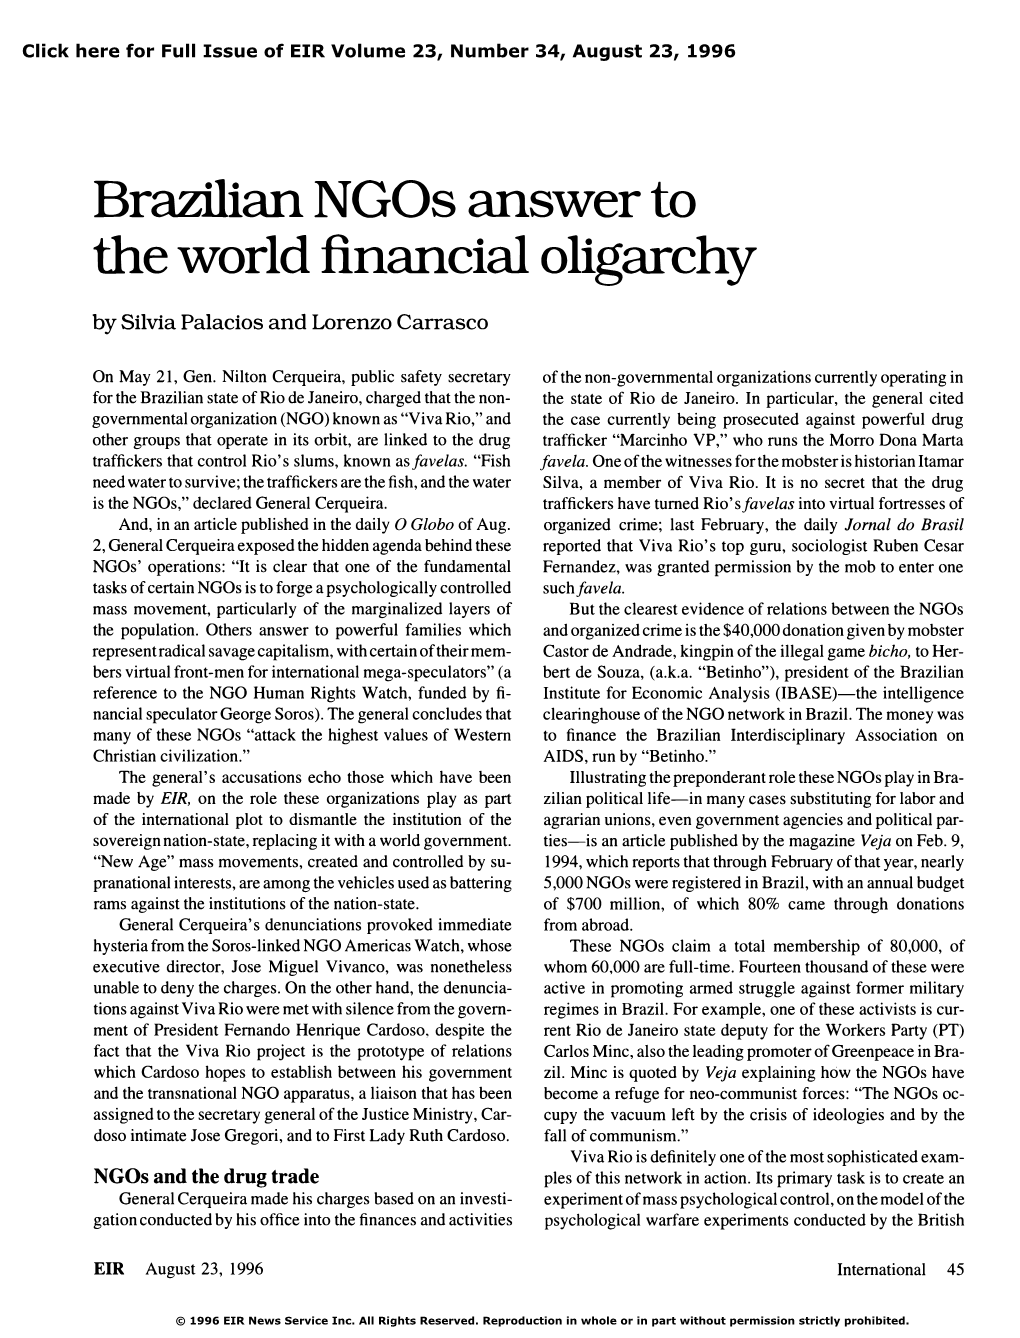 Brazilian Ngos Answer to the World Financial Oligarchy